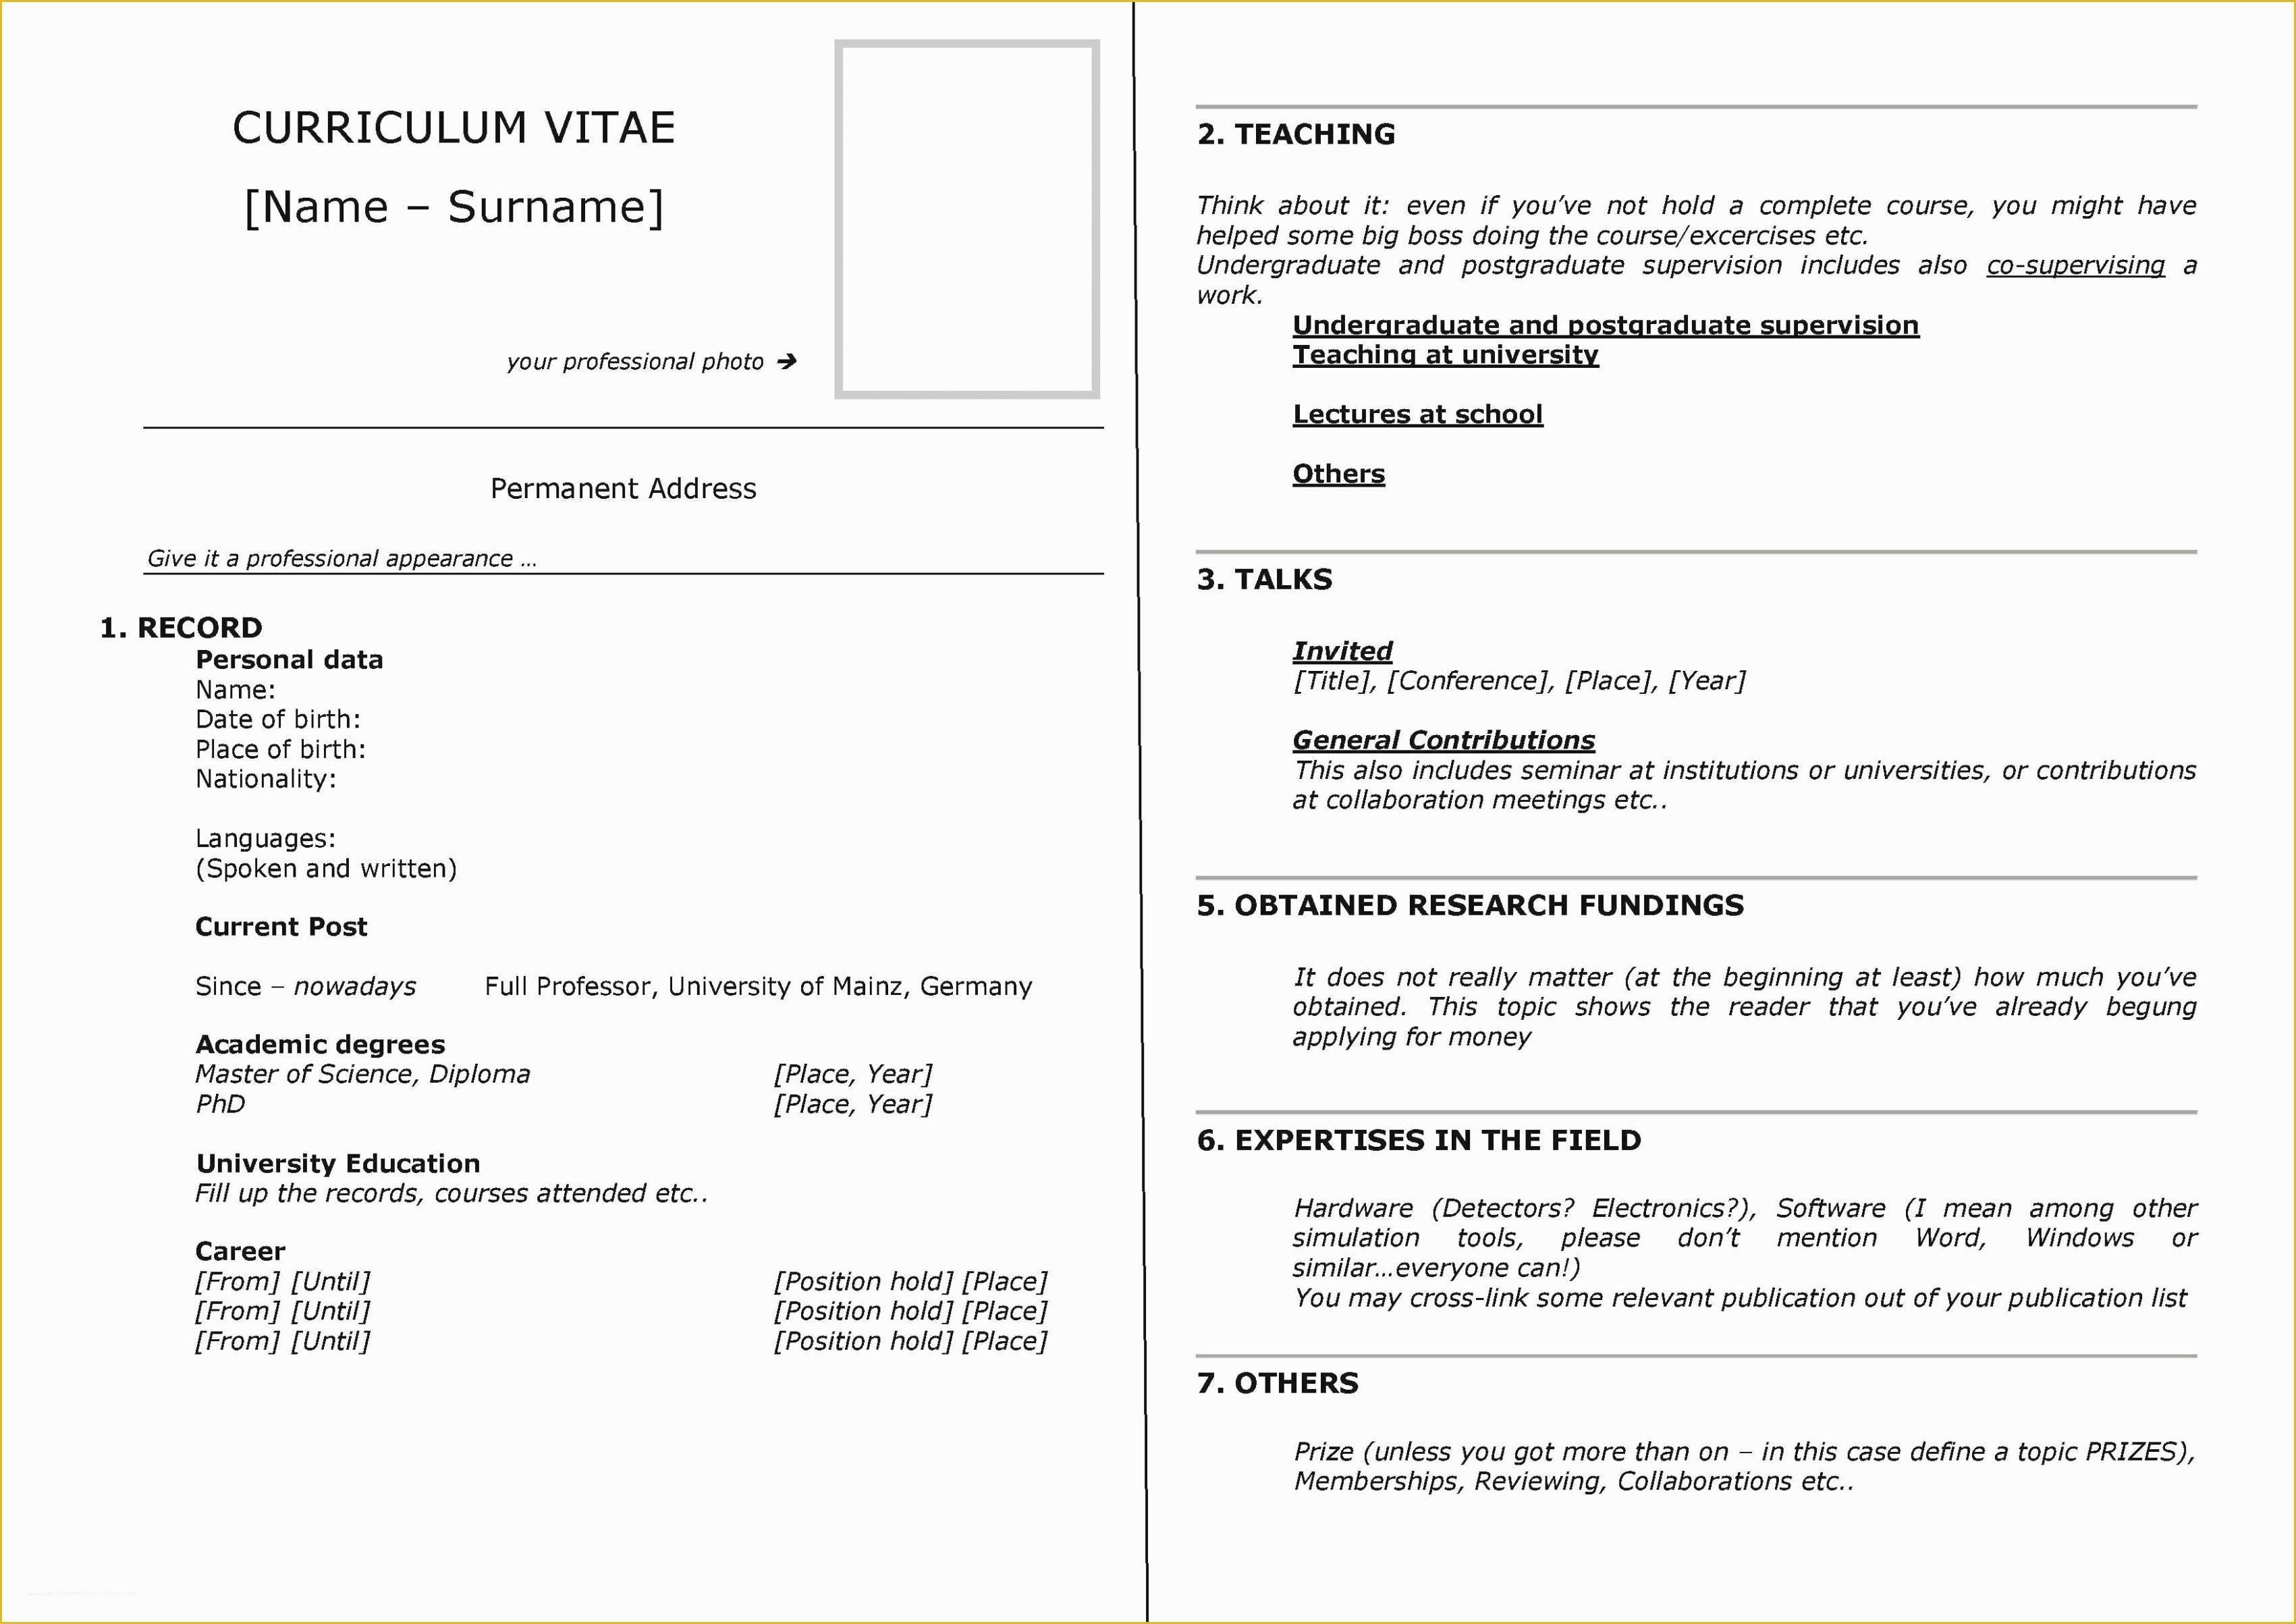 Free Resume Template with Photo Insert Of Ten top Risks Free Resume Template